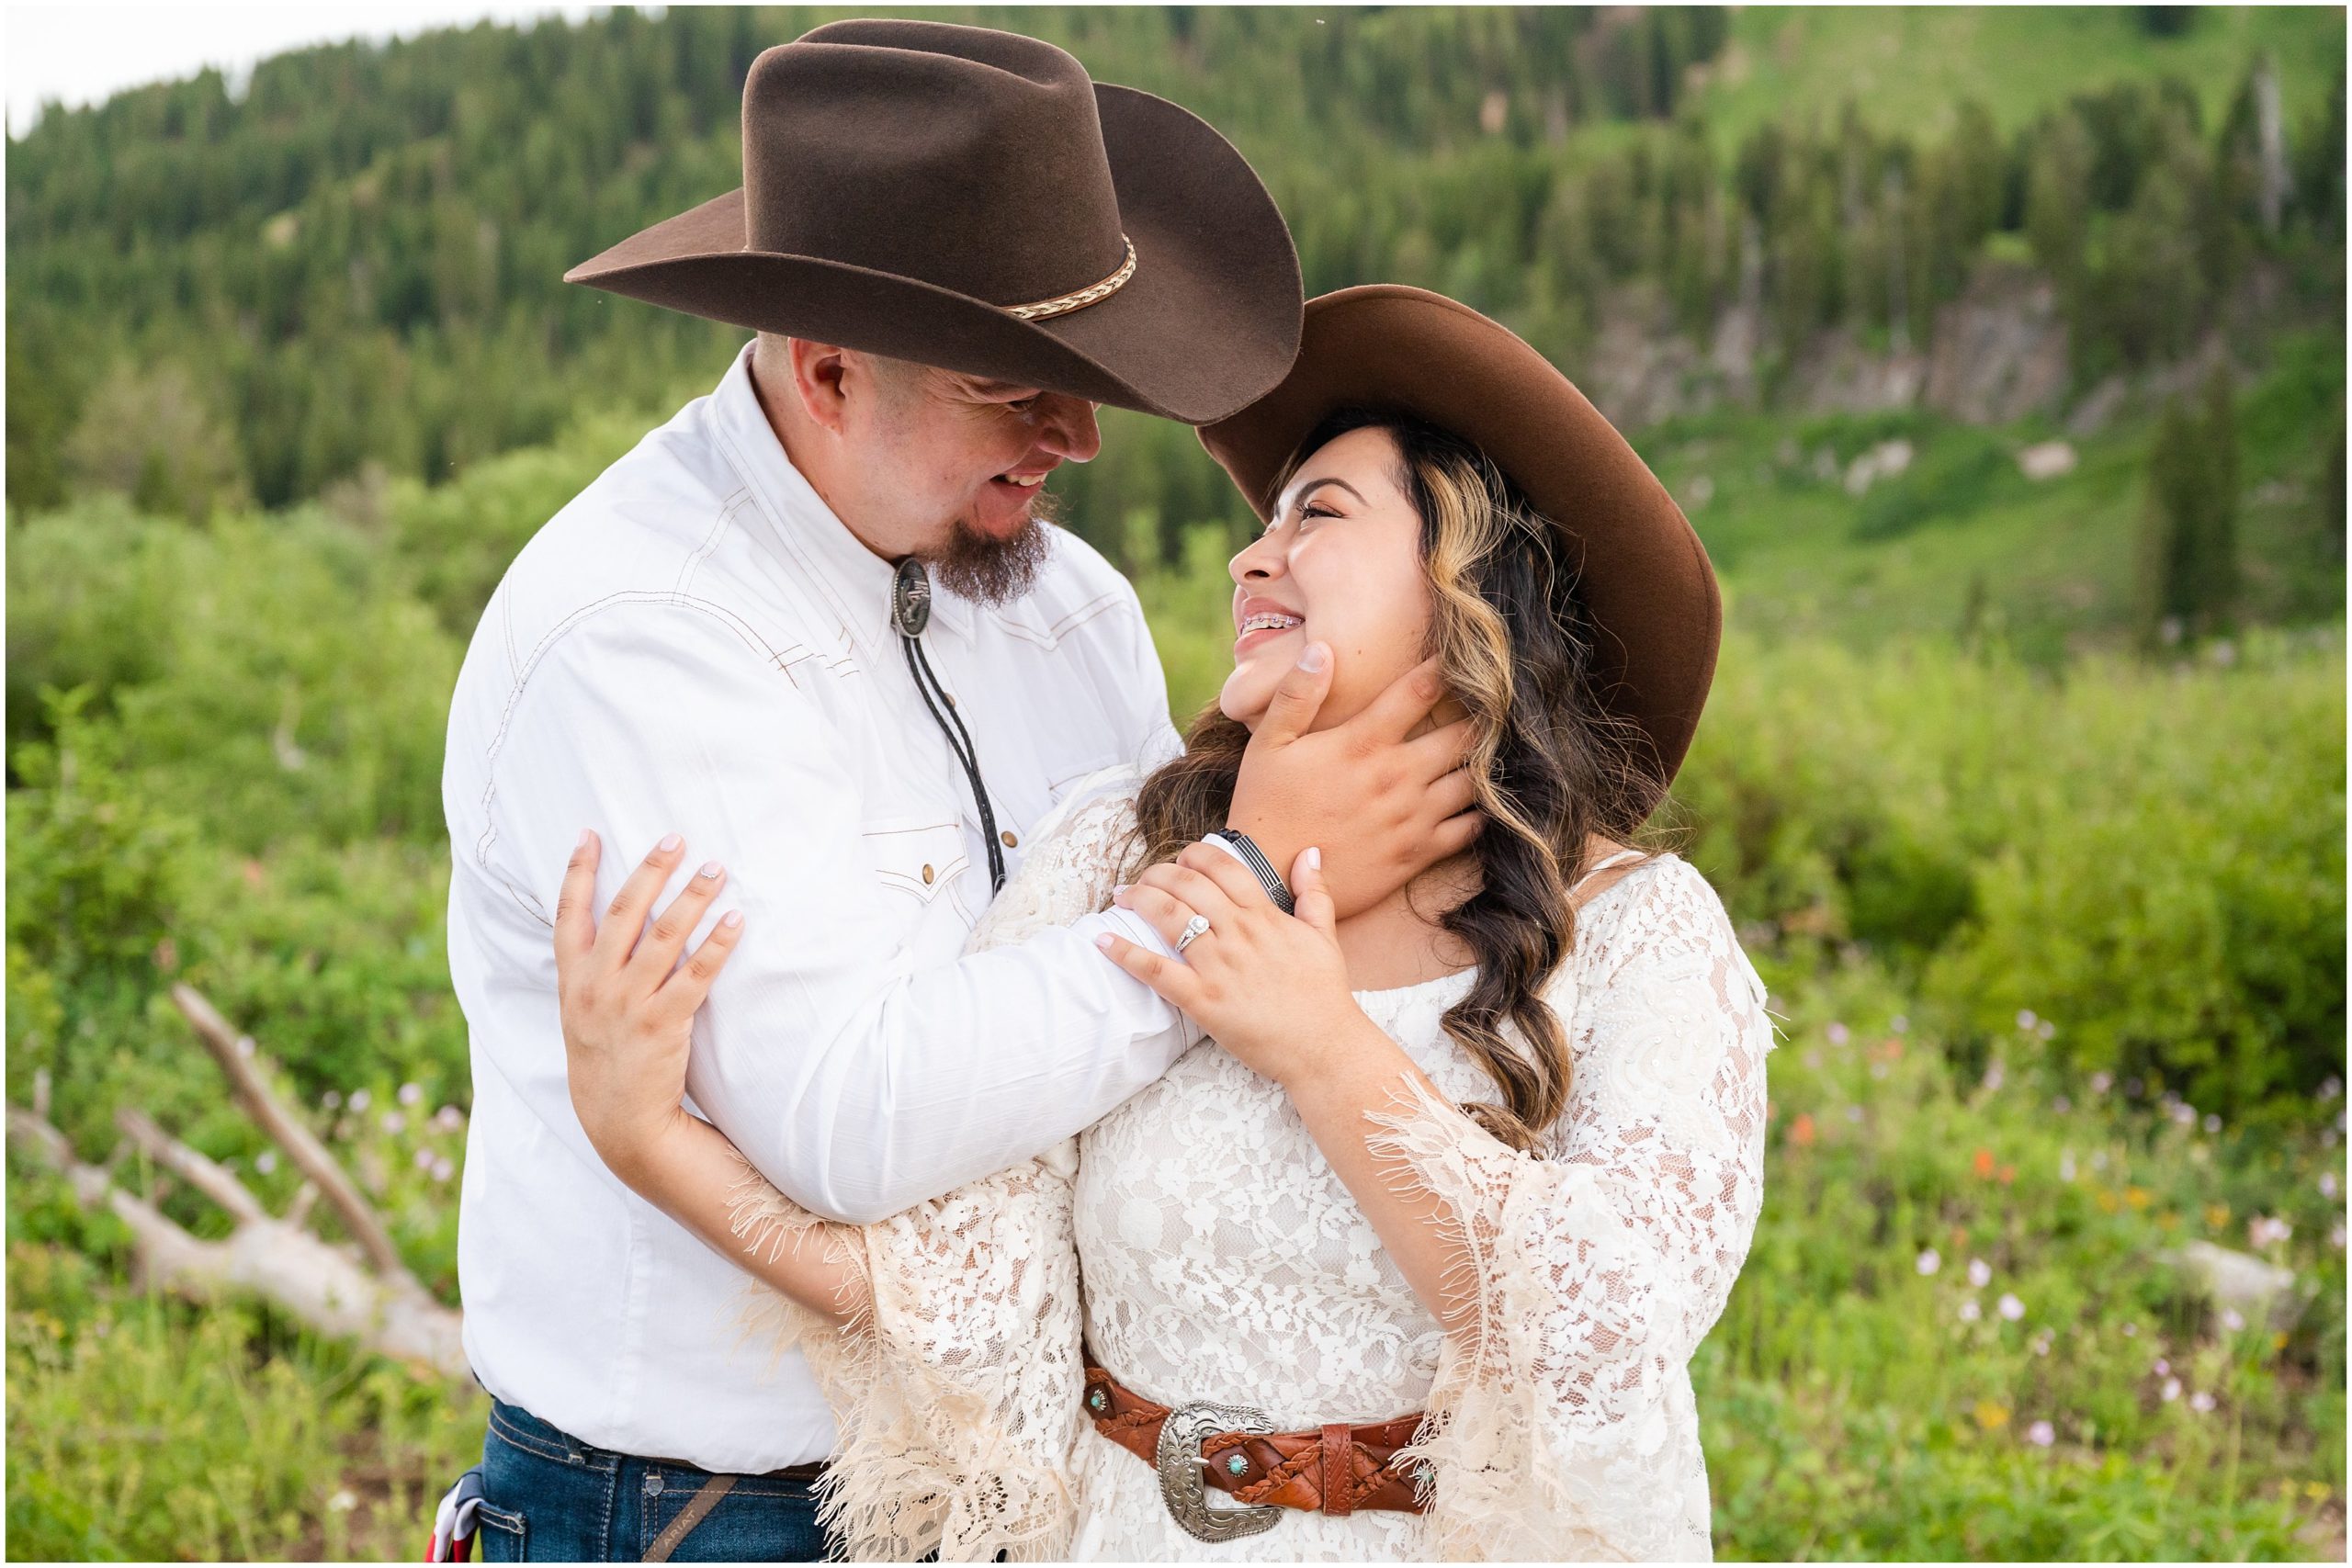 Couple in western outfits and cowboy hats during engagement session | Tony Grove Western Destination Engagement